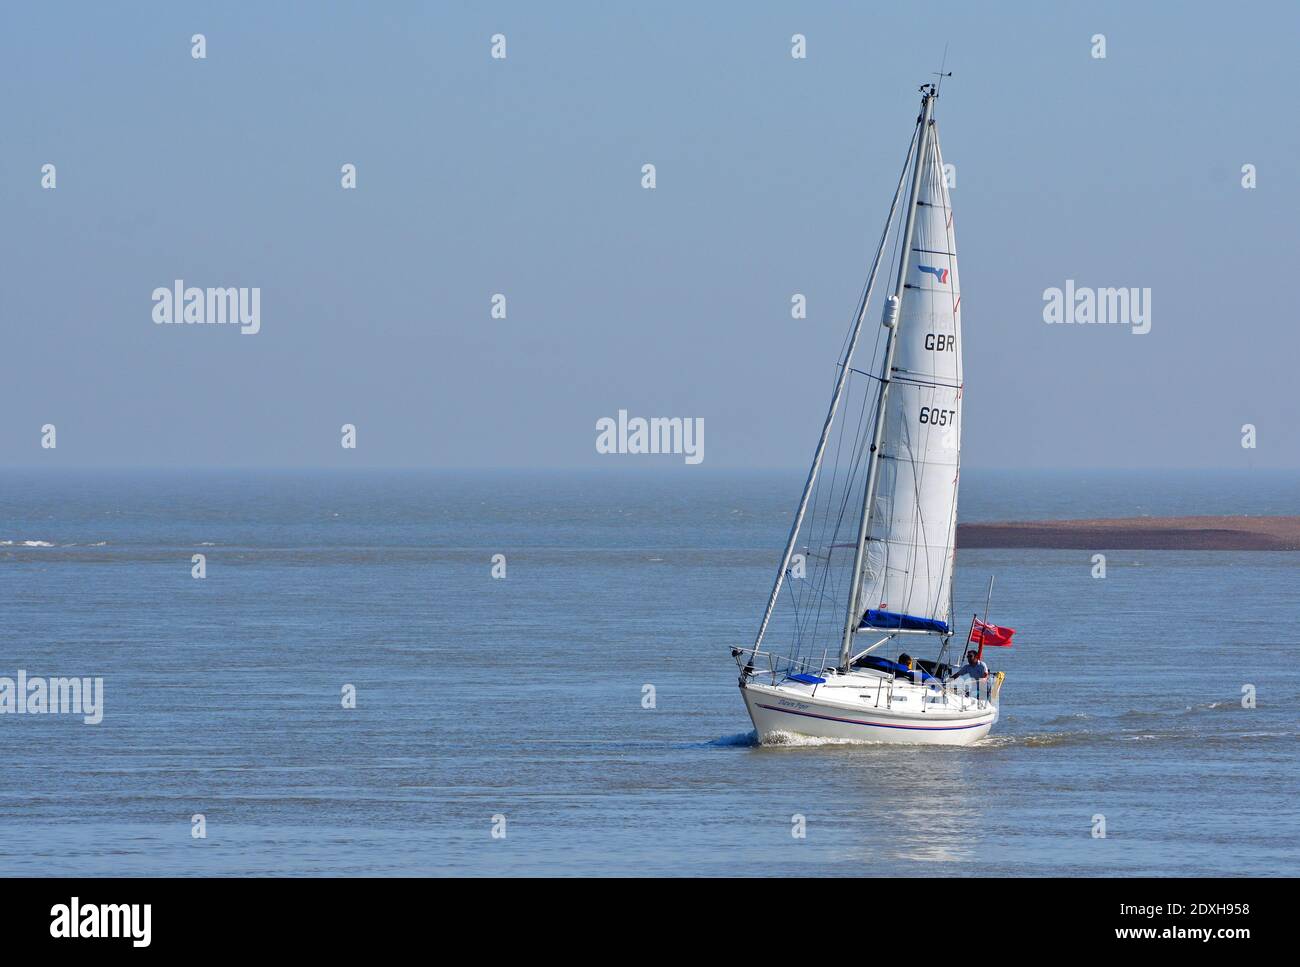 Yacht under sail at the estuary of the river Deben at Felixstowe Ferry. Stock Photo